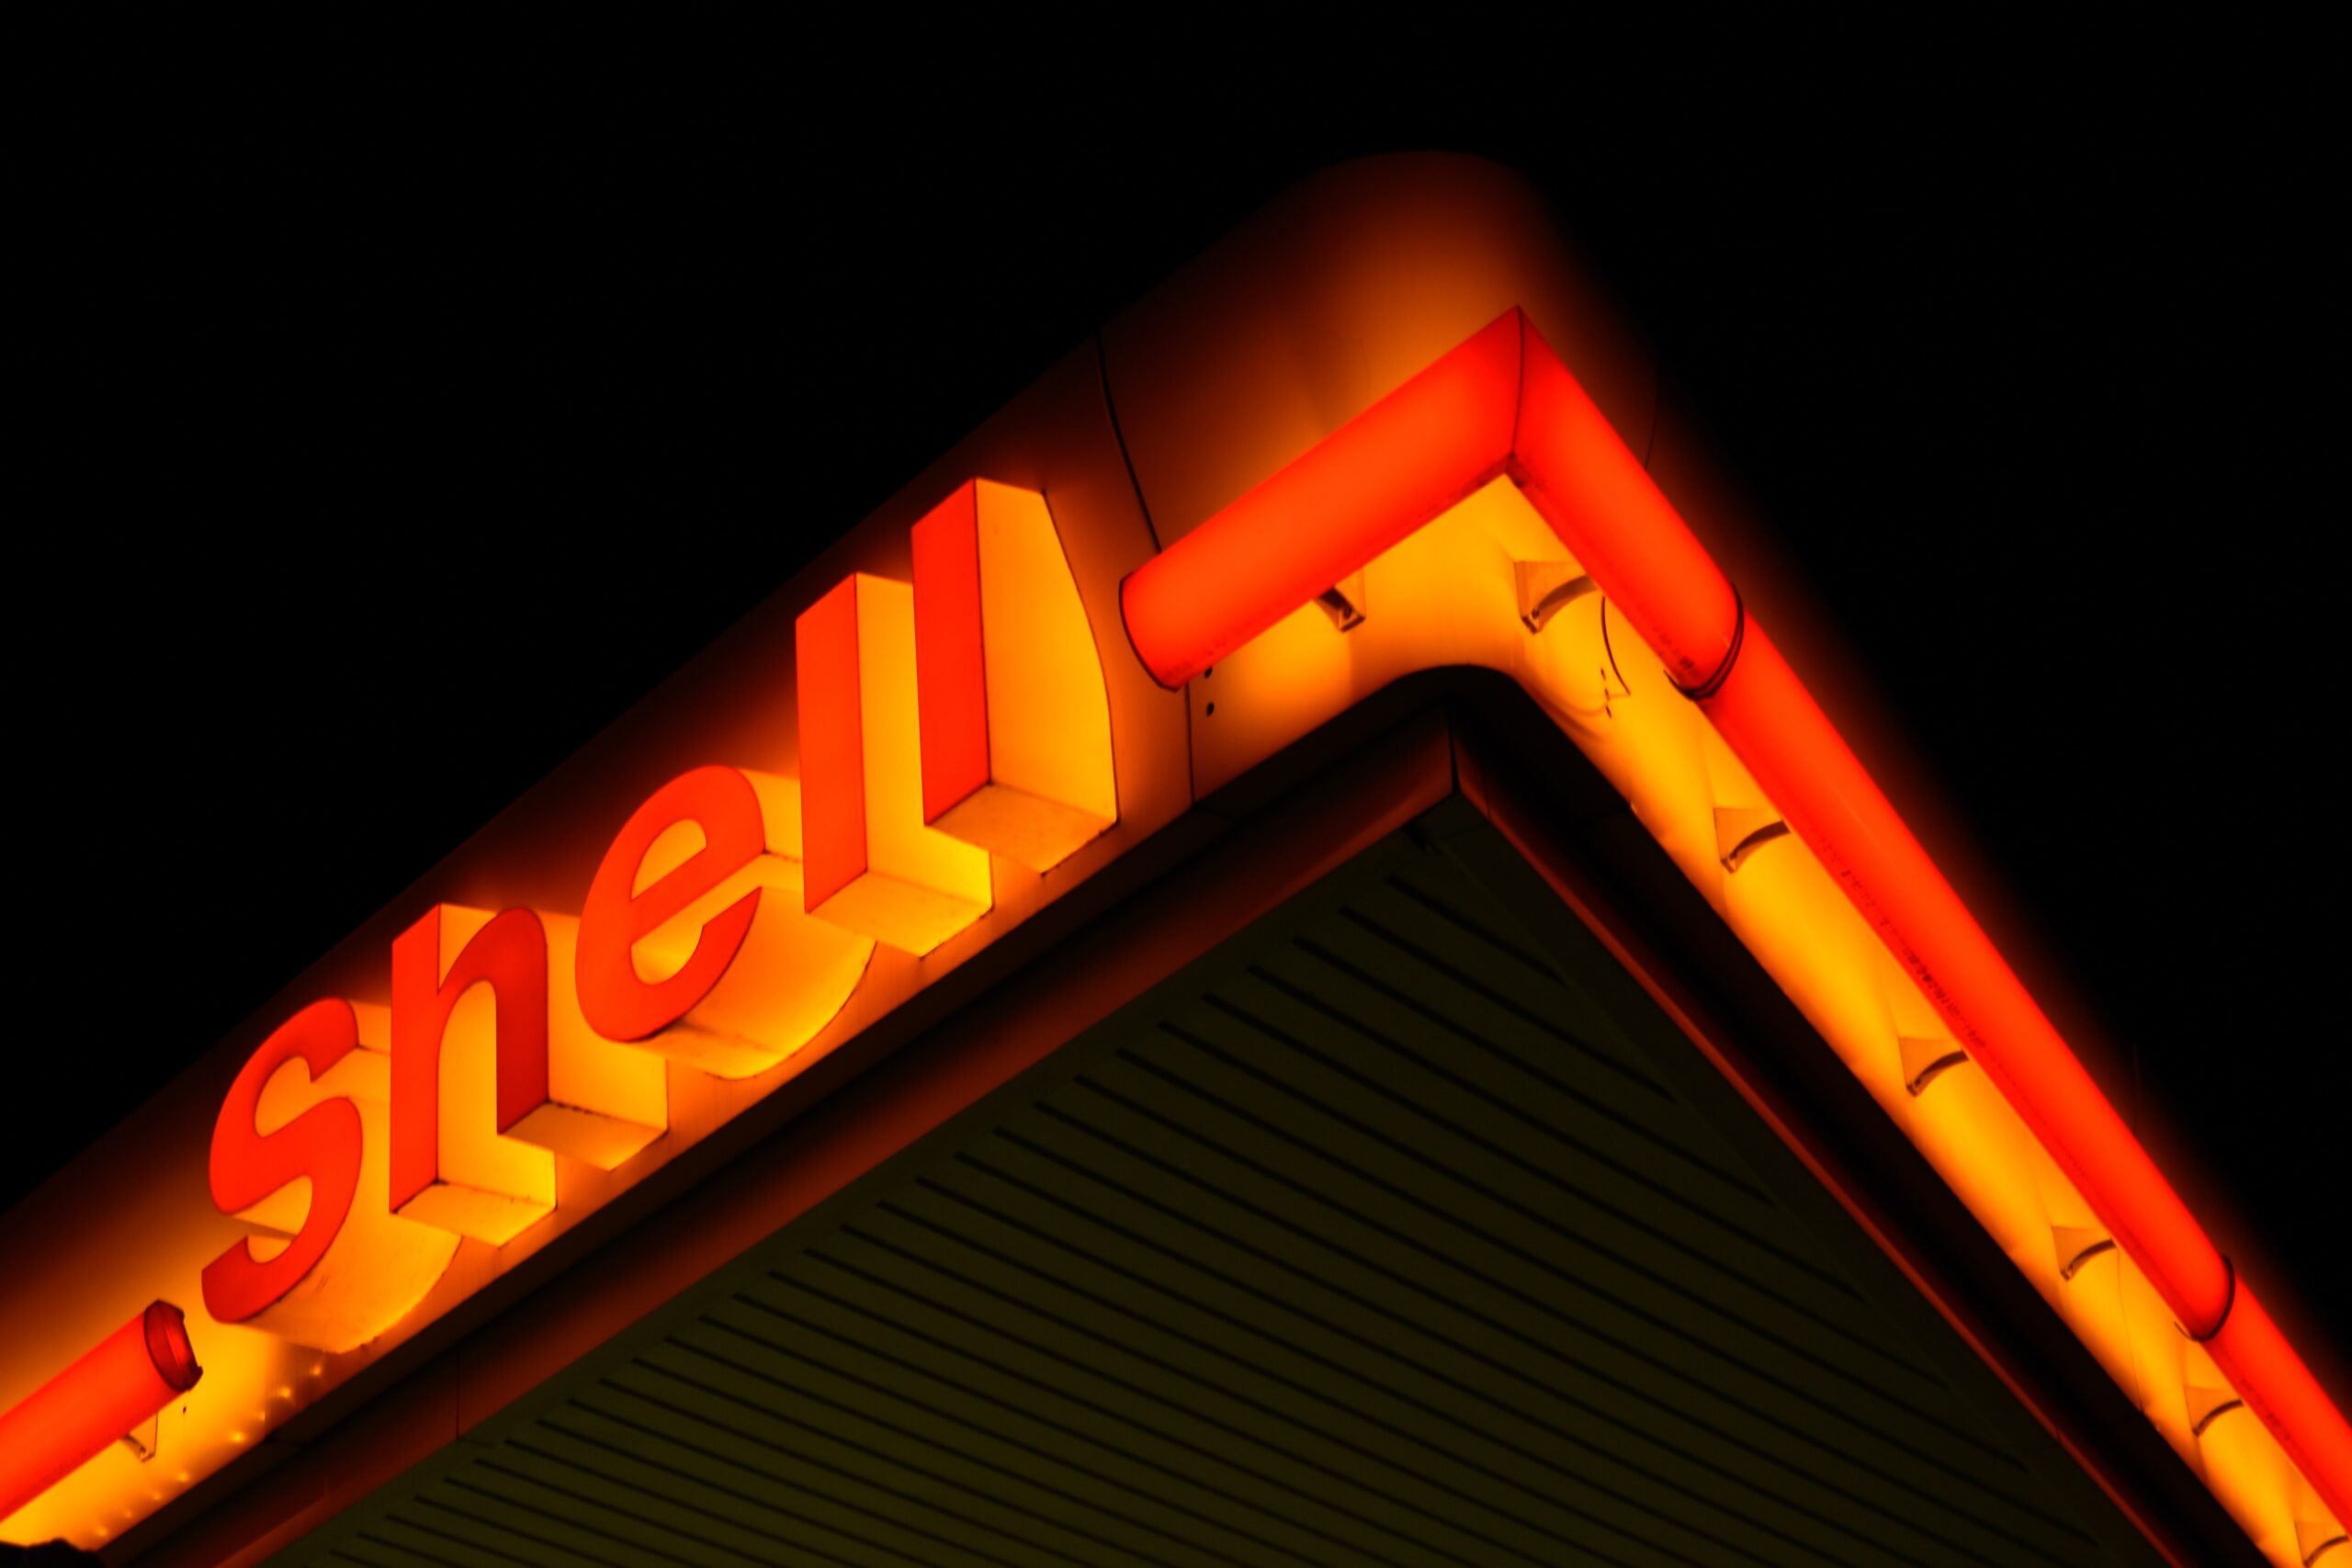 An illuminated red and yellow Shell sign at night